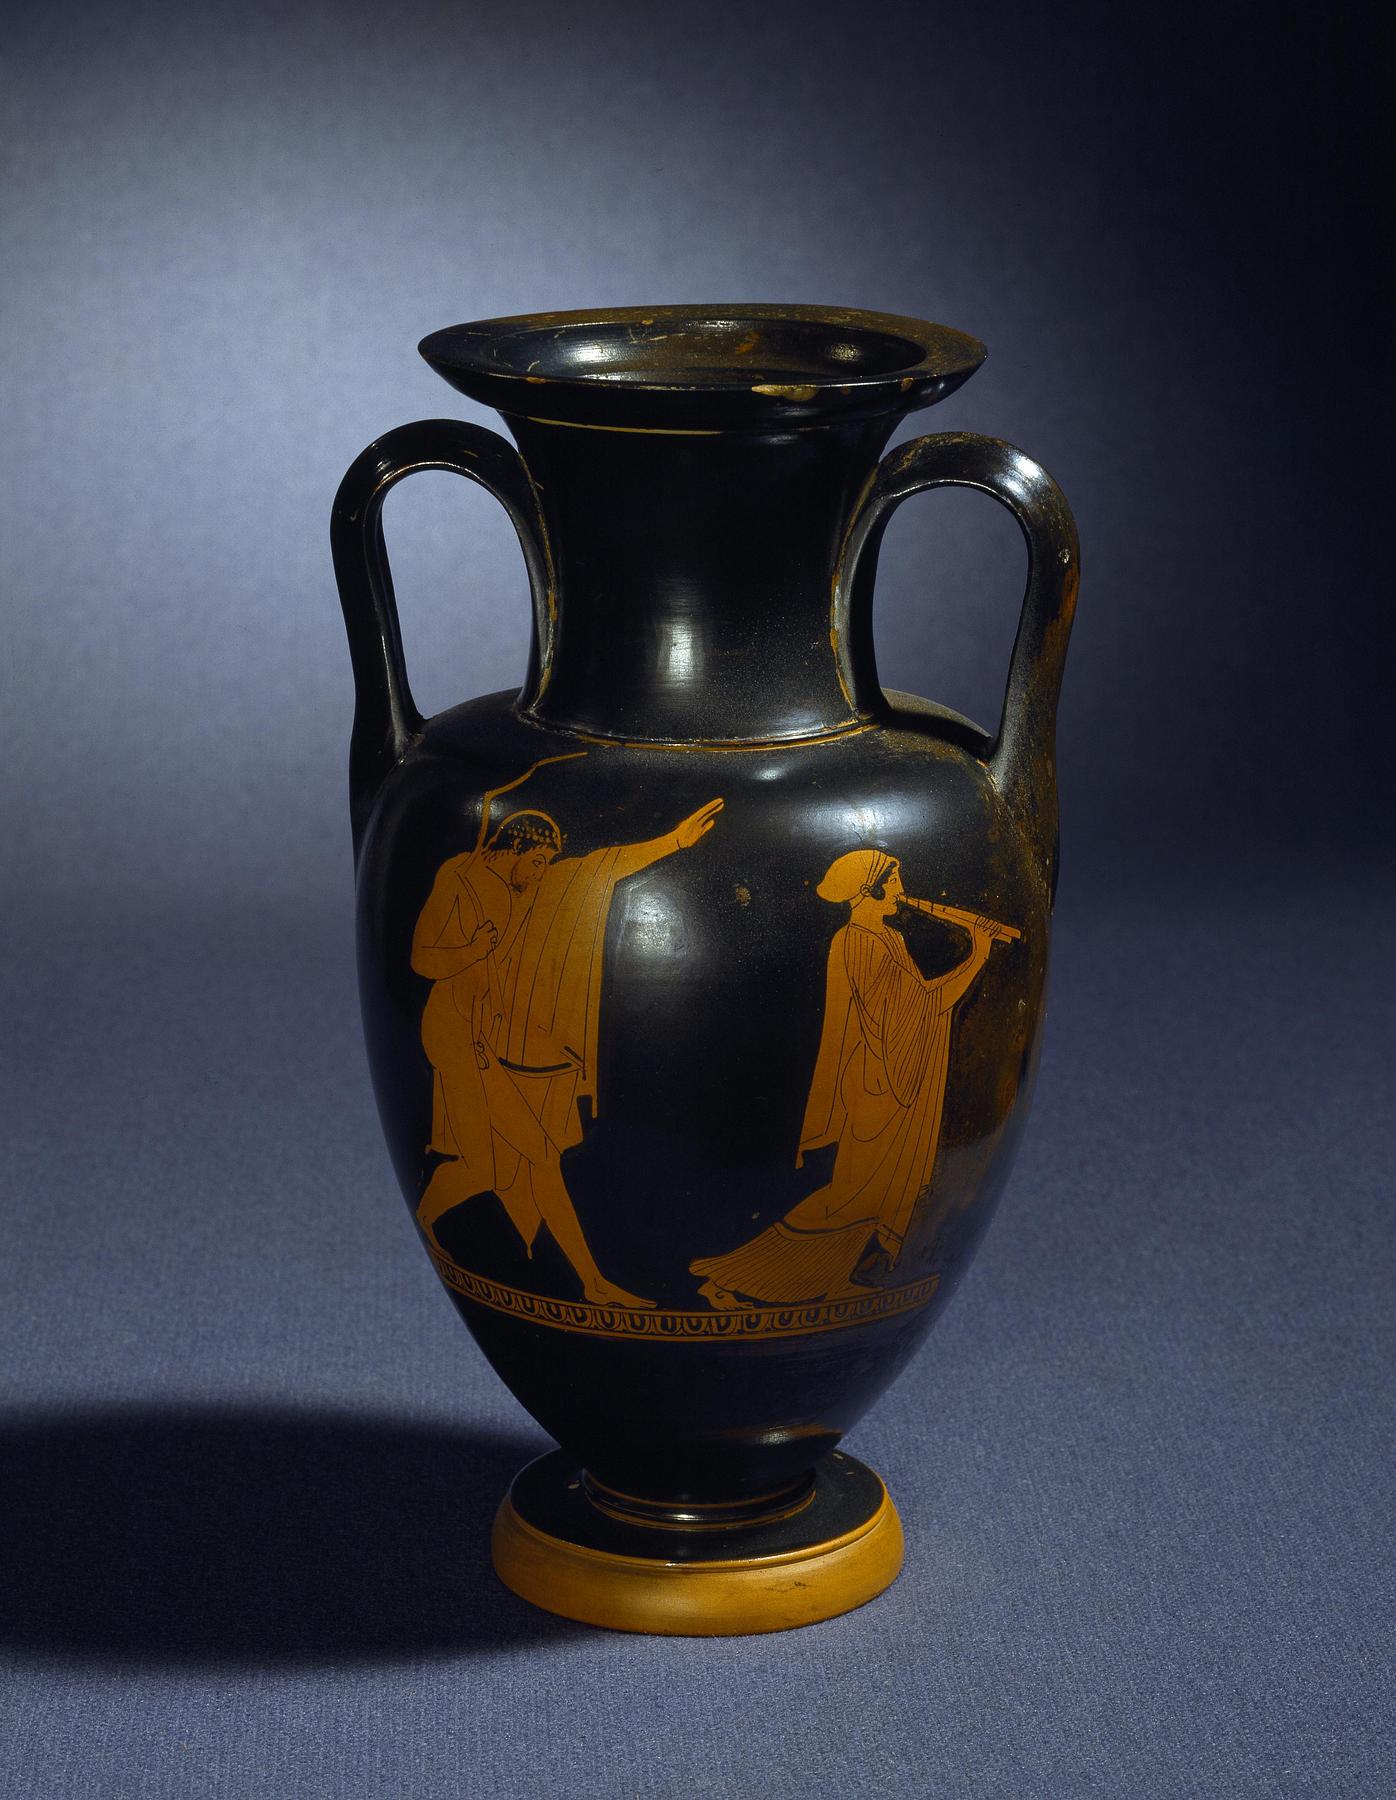 Amphora with a man and a woman playing flute (A), a youth with a lyre, and a woman playing the flute (B), H617